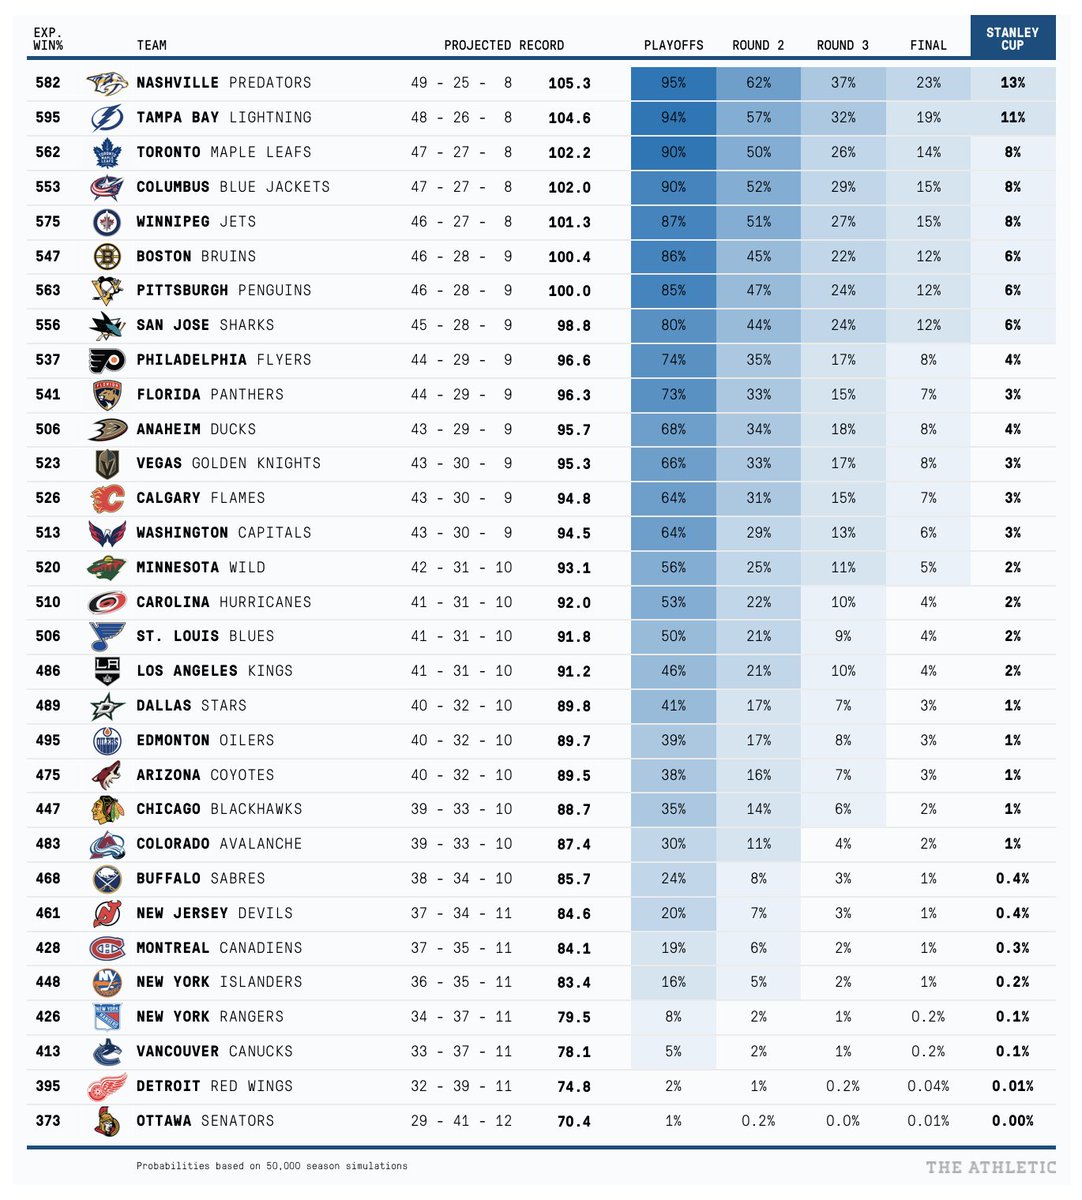 2018-19 projected NHL standings 